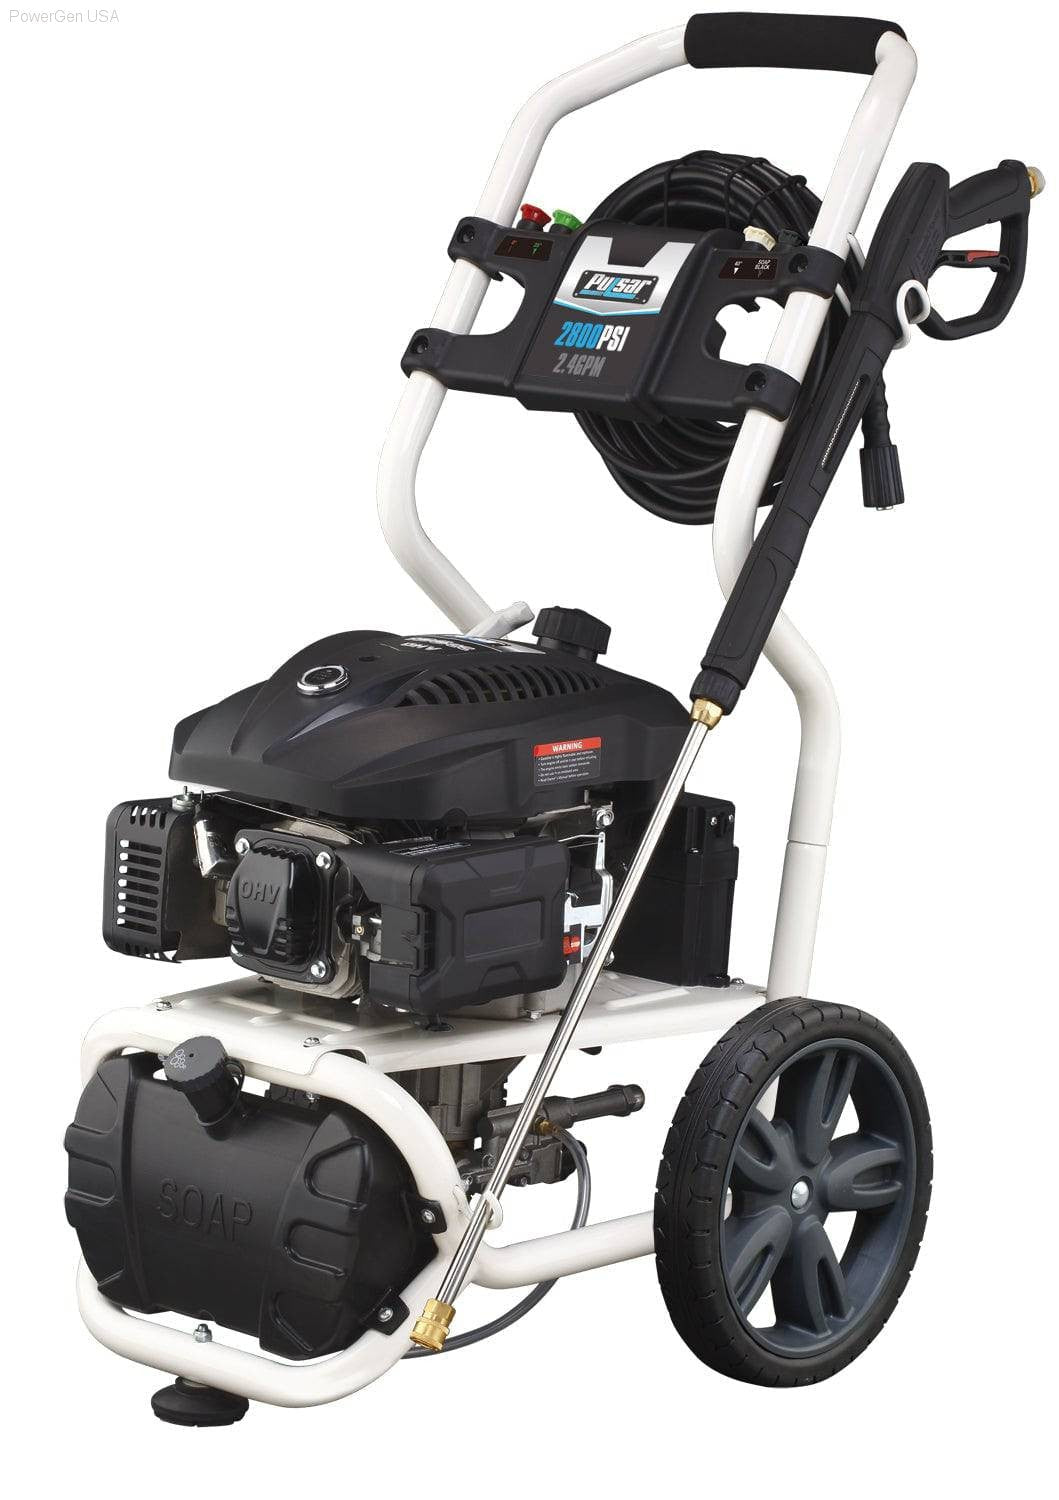 Pressure Washers - Pulsar PWG3100VE-3100 PSI Gas-Powered Pressure Washer With Electric Push Start